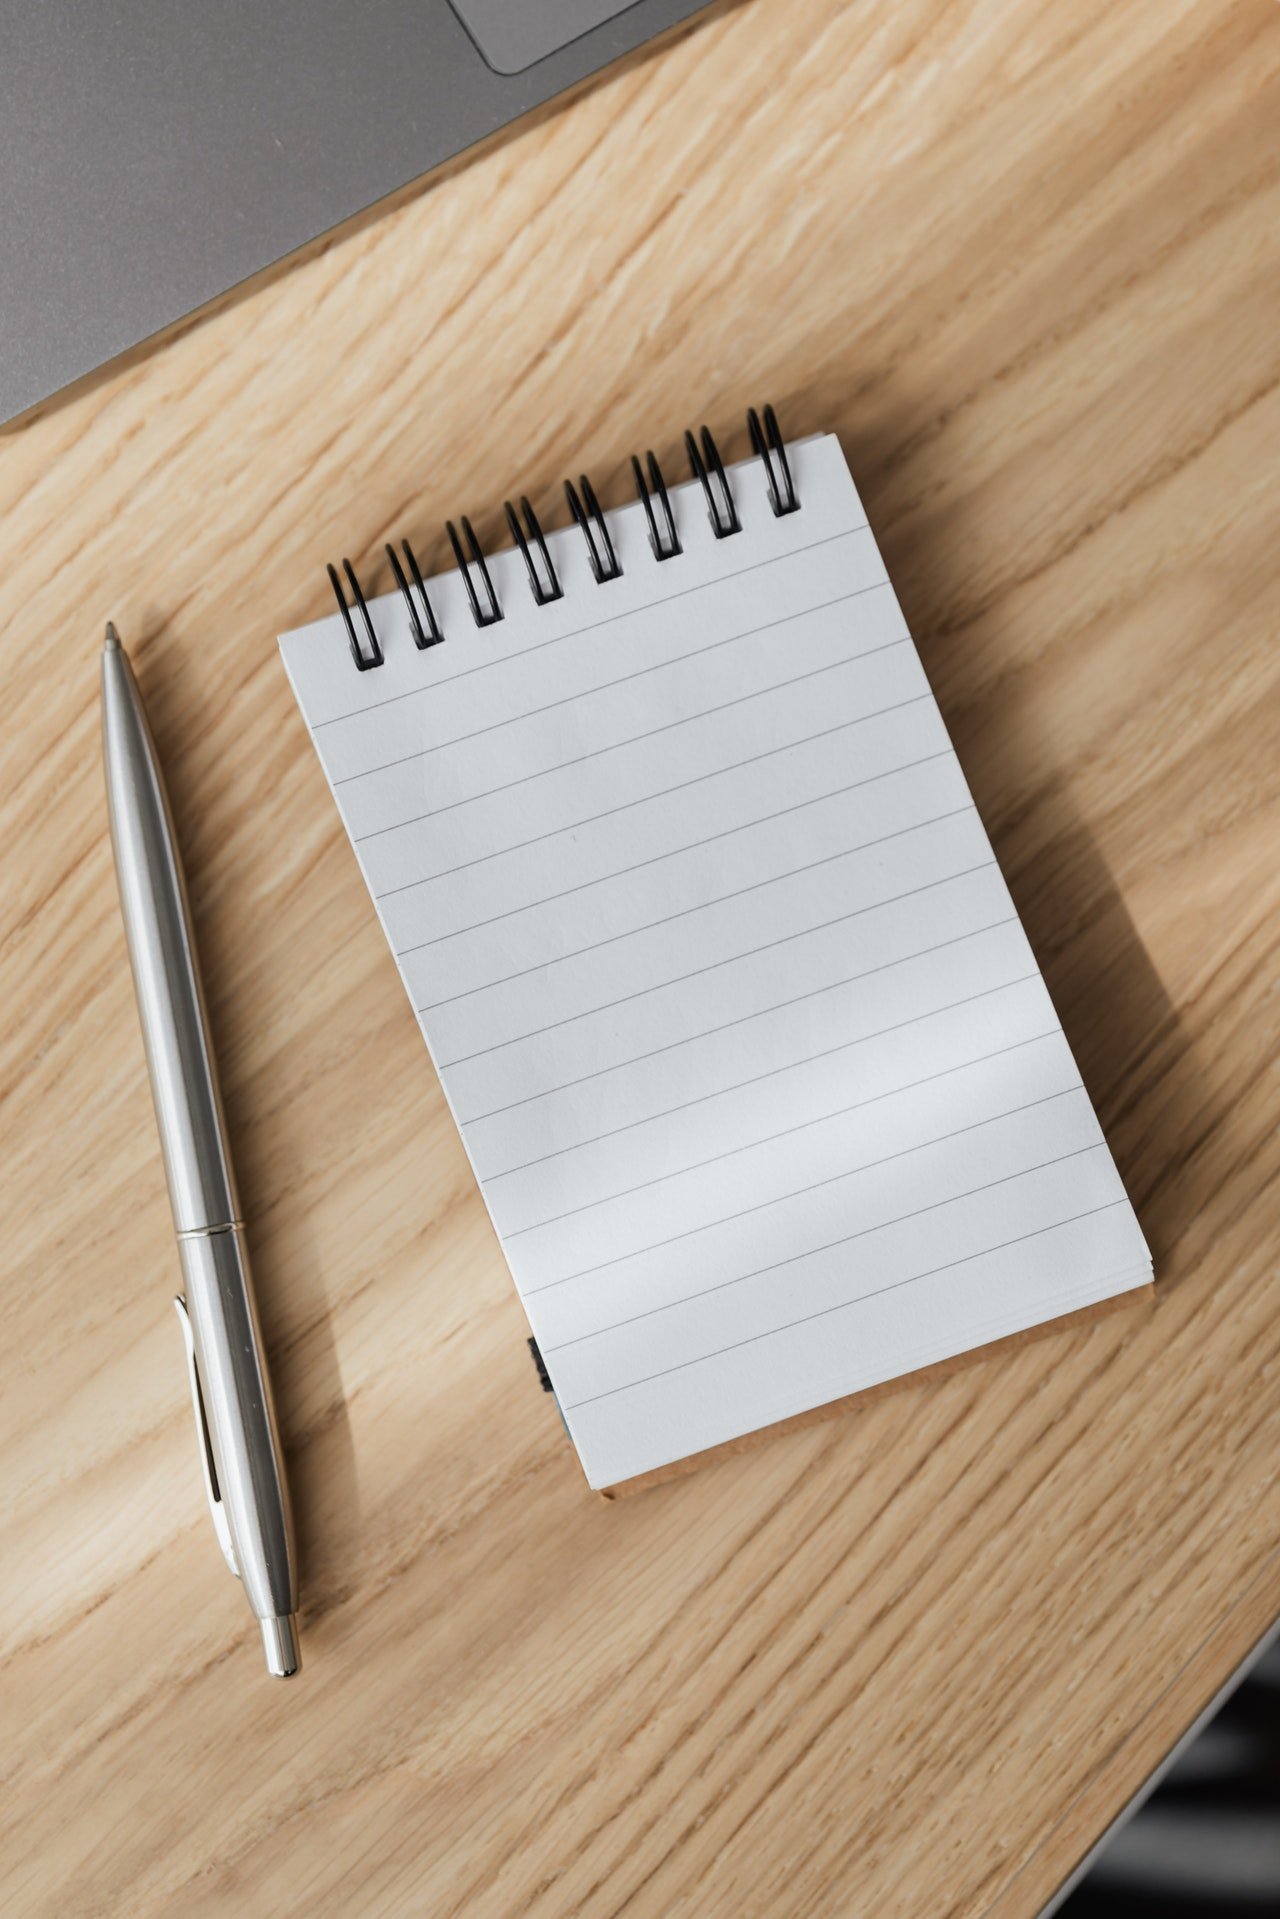 Notebook with a silver pen | Source: Pexels